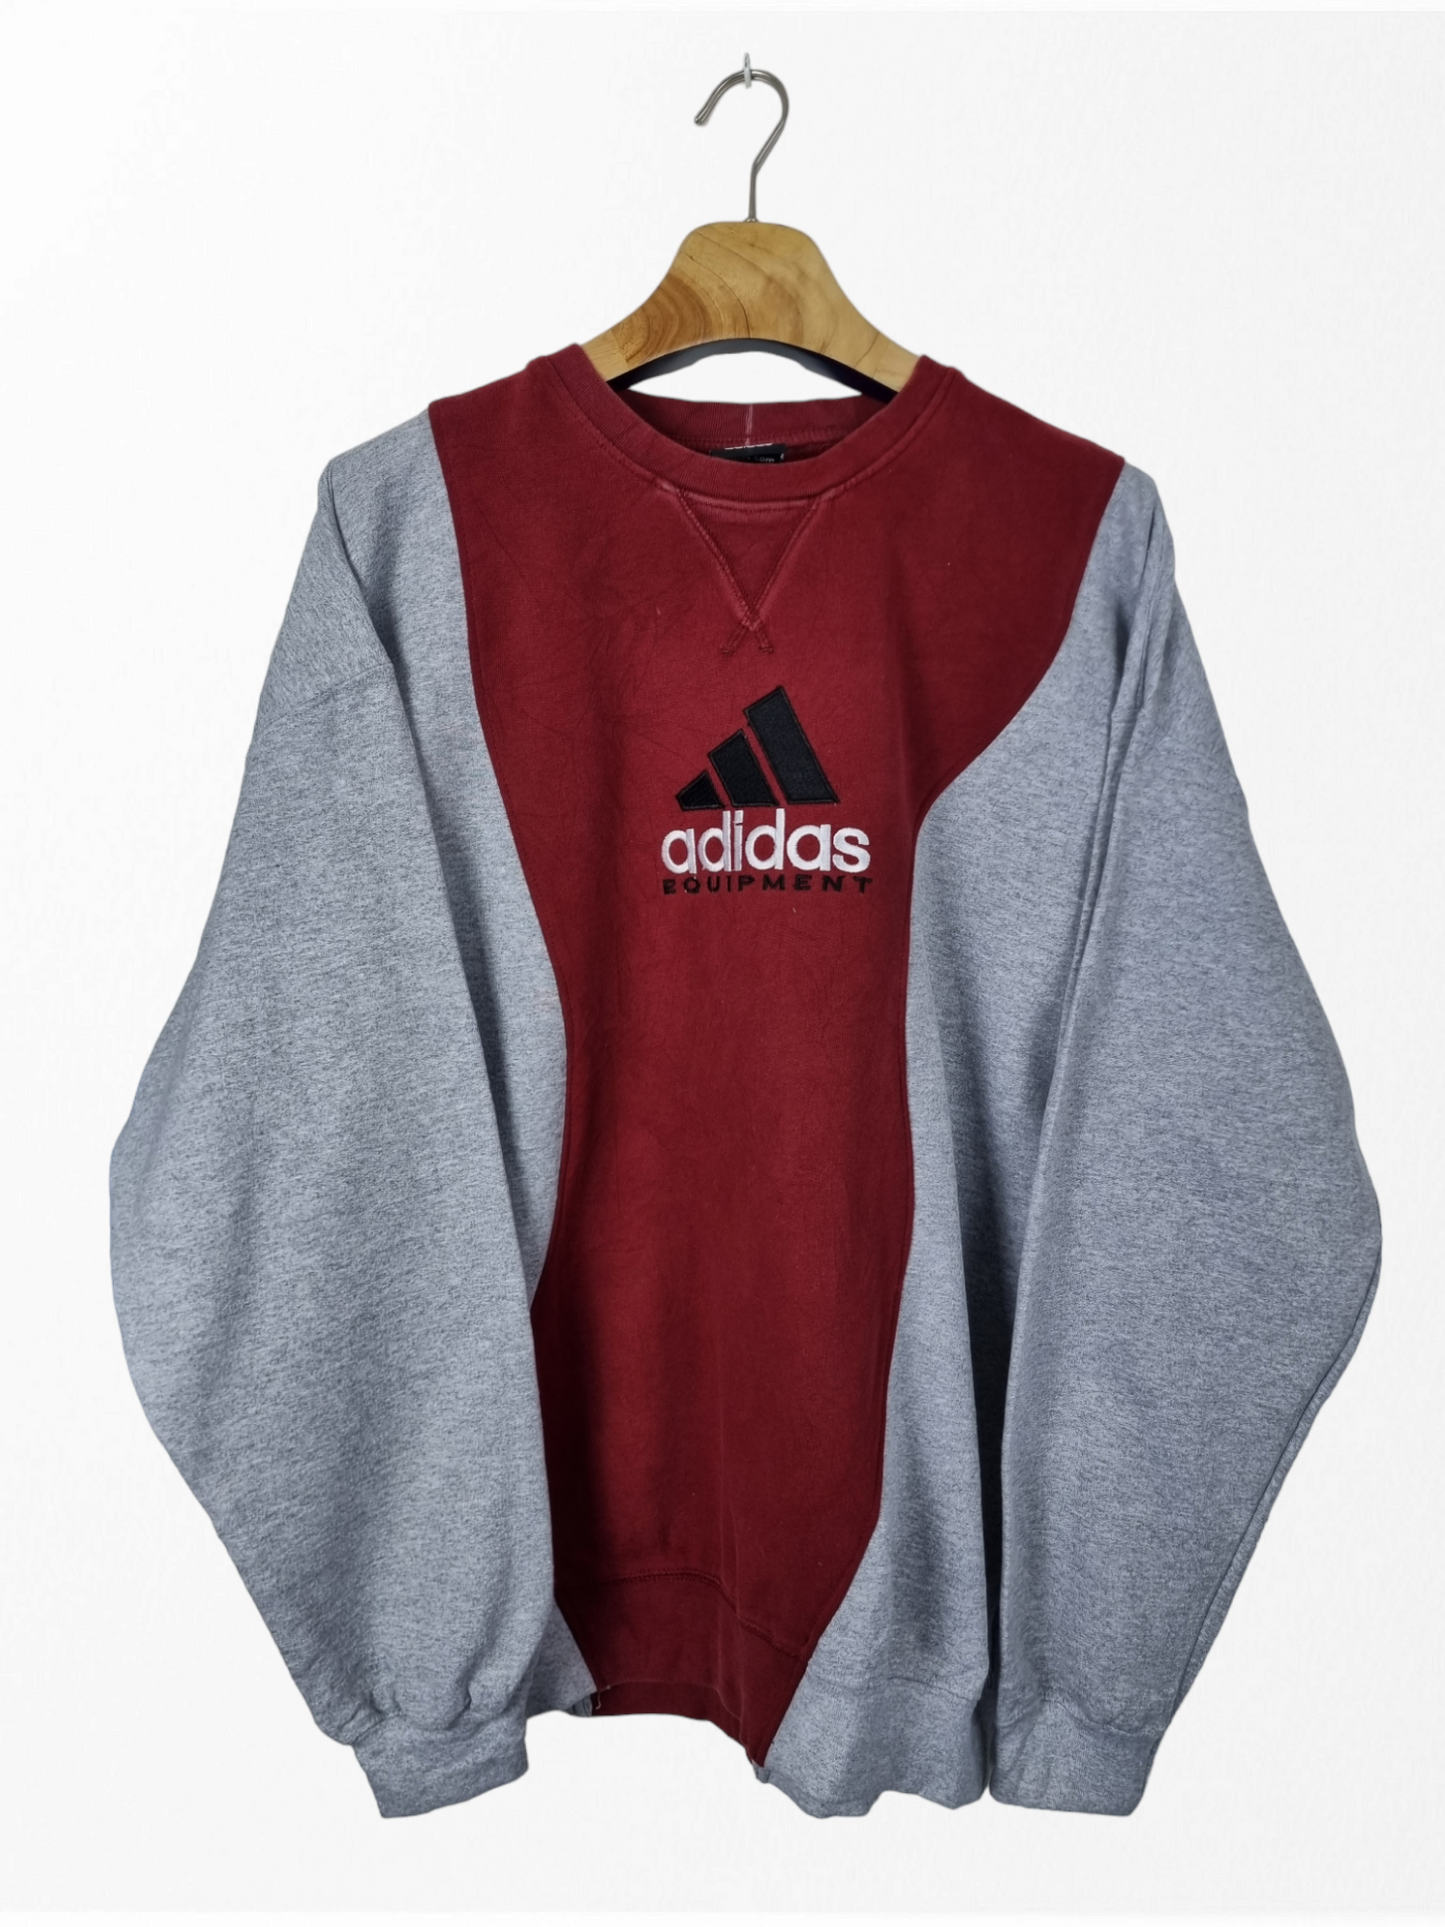 Adidas equipment reworked sweater maat L